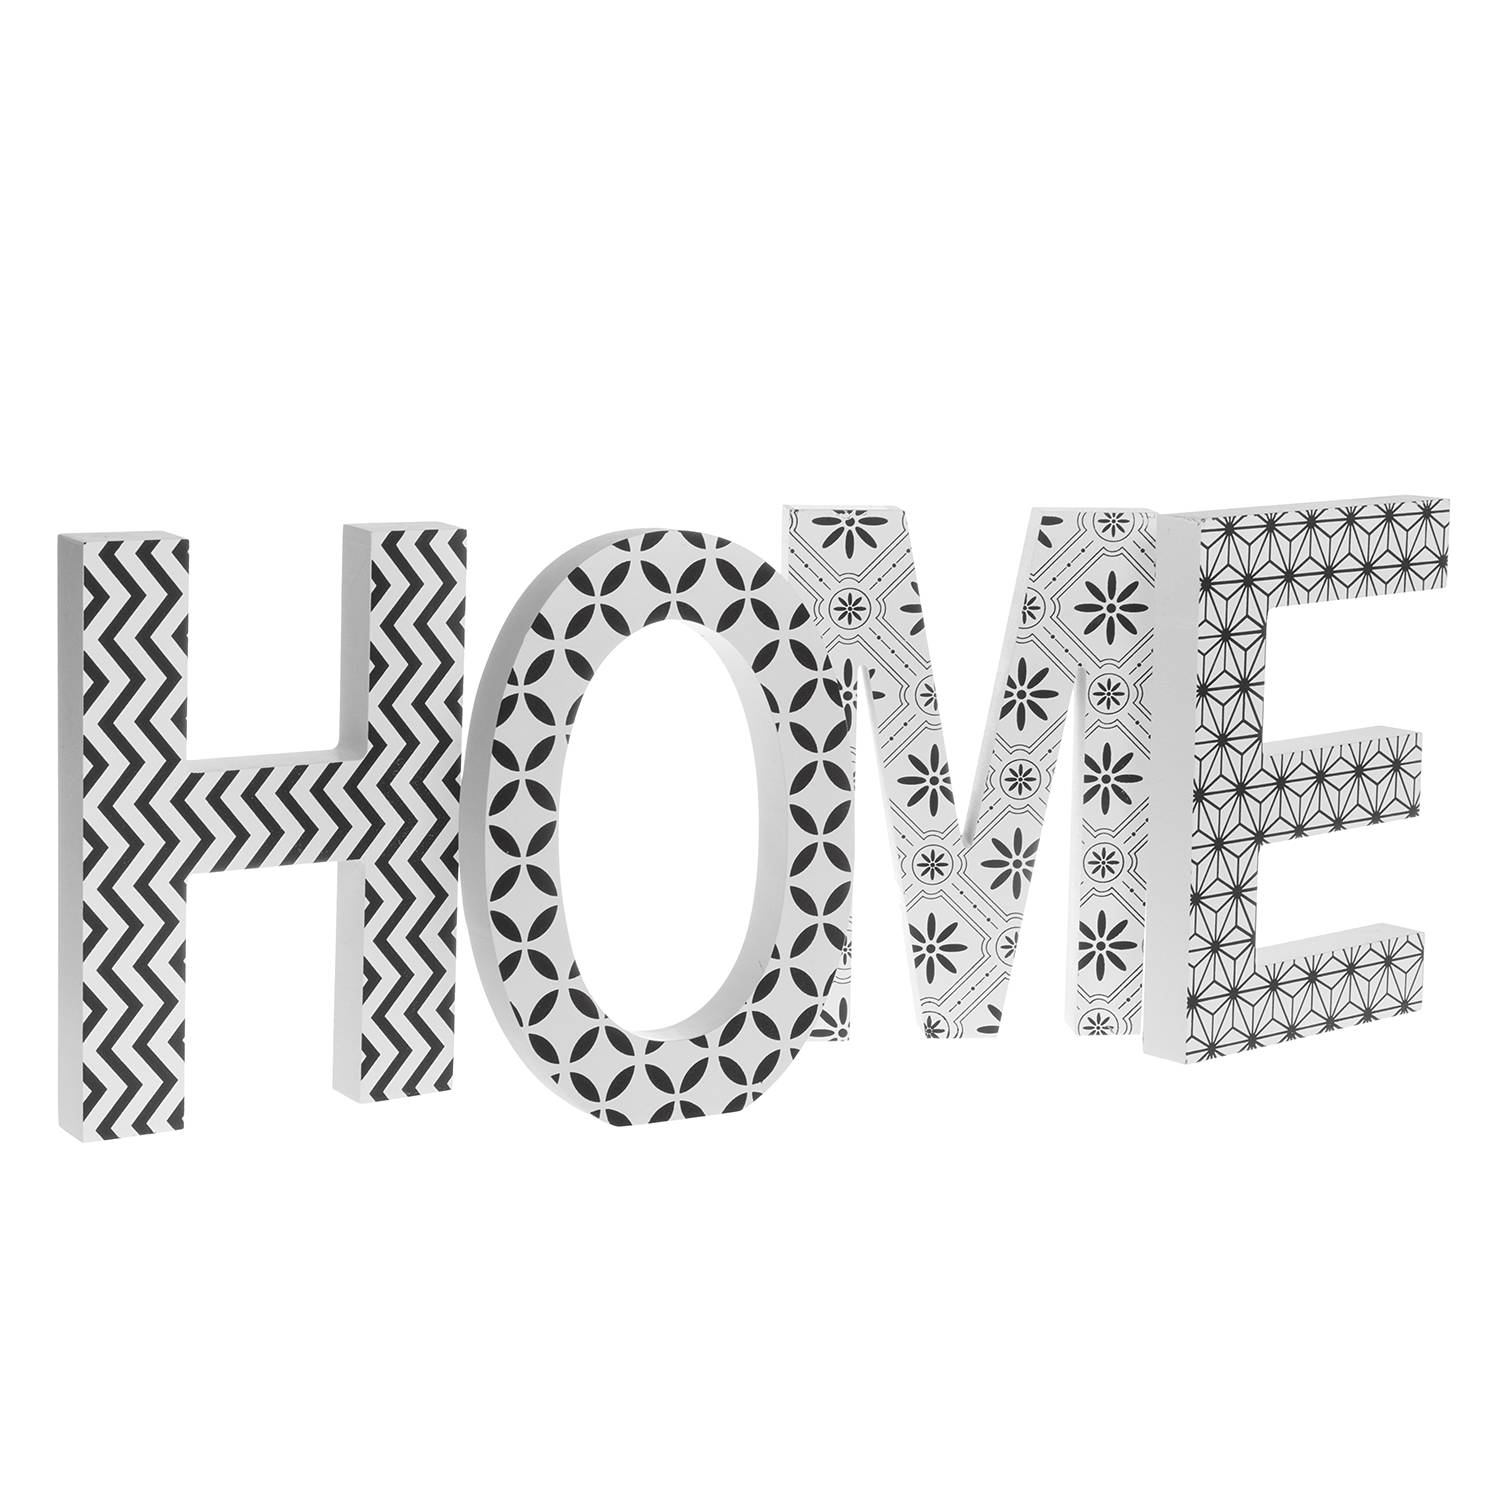 Letters HOME | home24